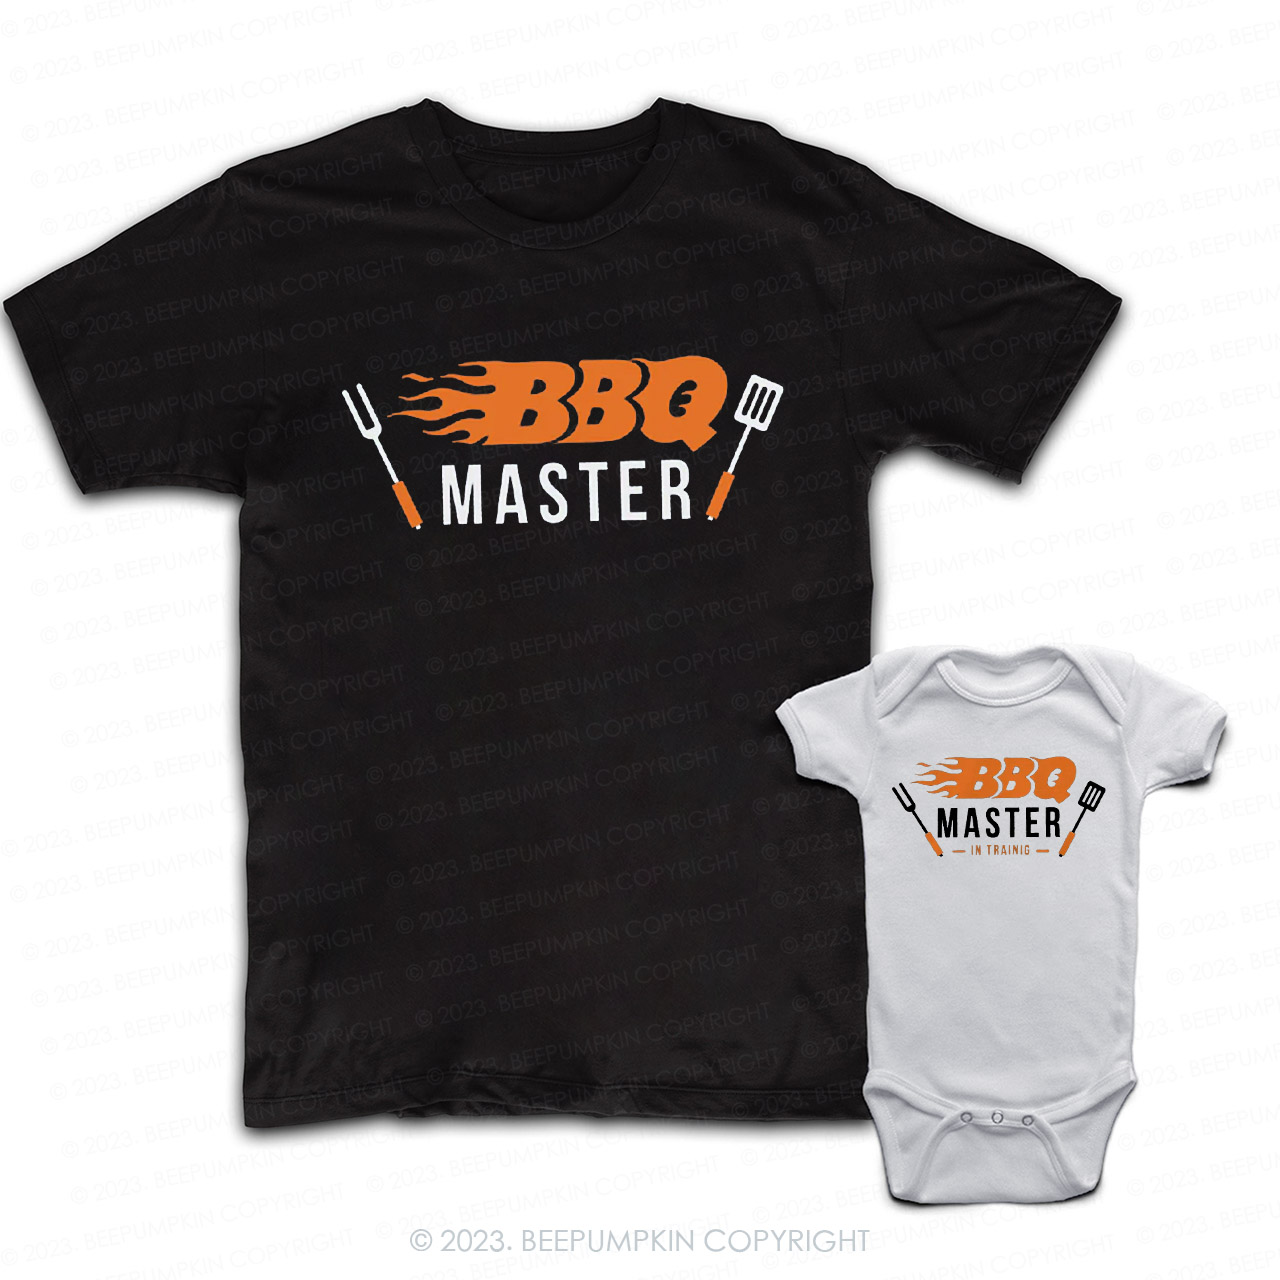 BBQ Master And BBQ Master In Training Matching T-Shirts For Dad&Me